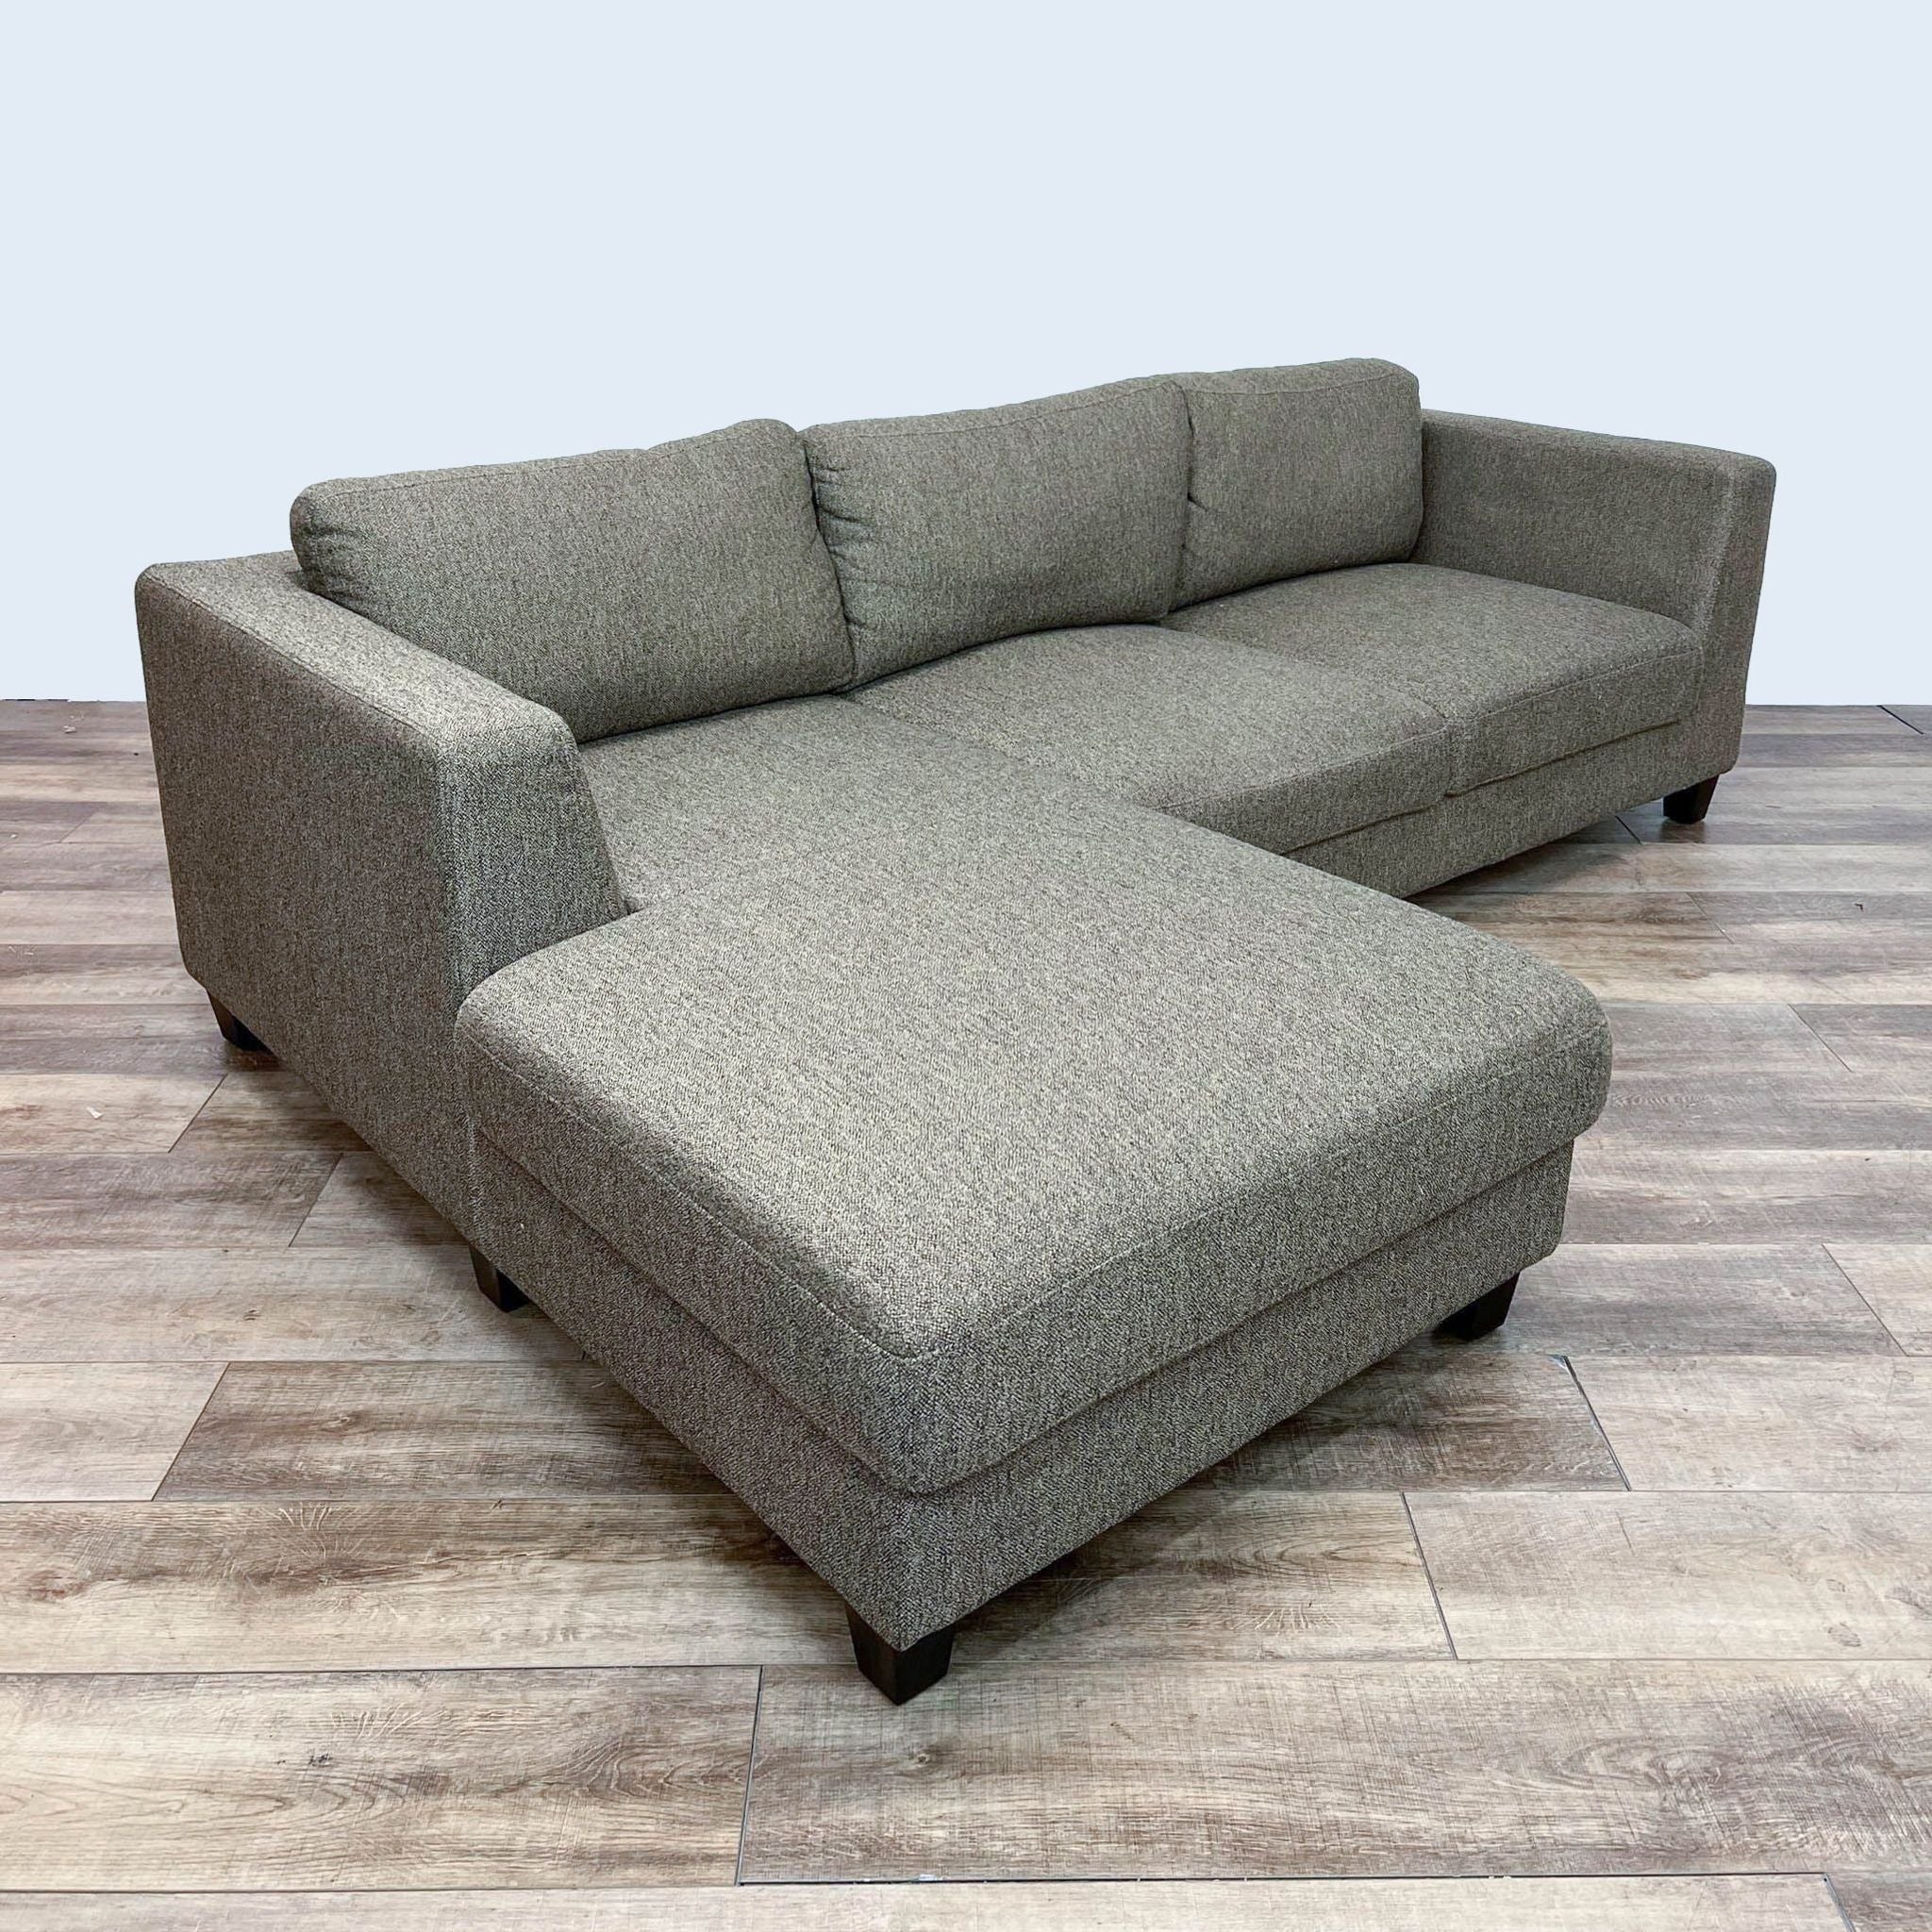 Reperch contemporary sectional with clean lines and dark wood finish feet on wooden floor.